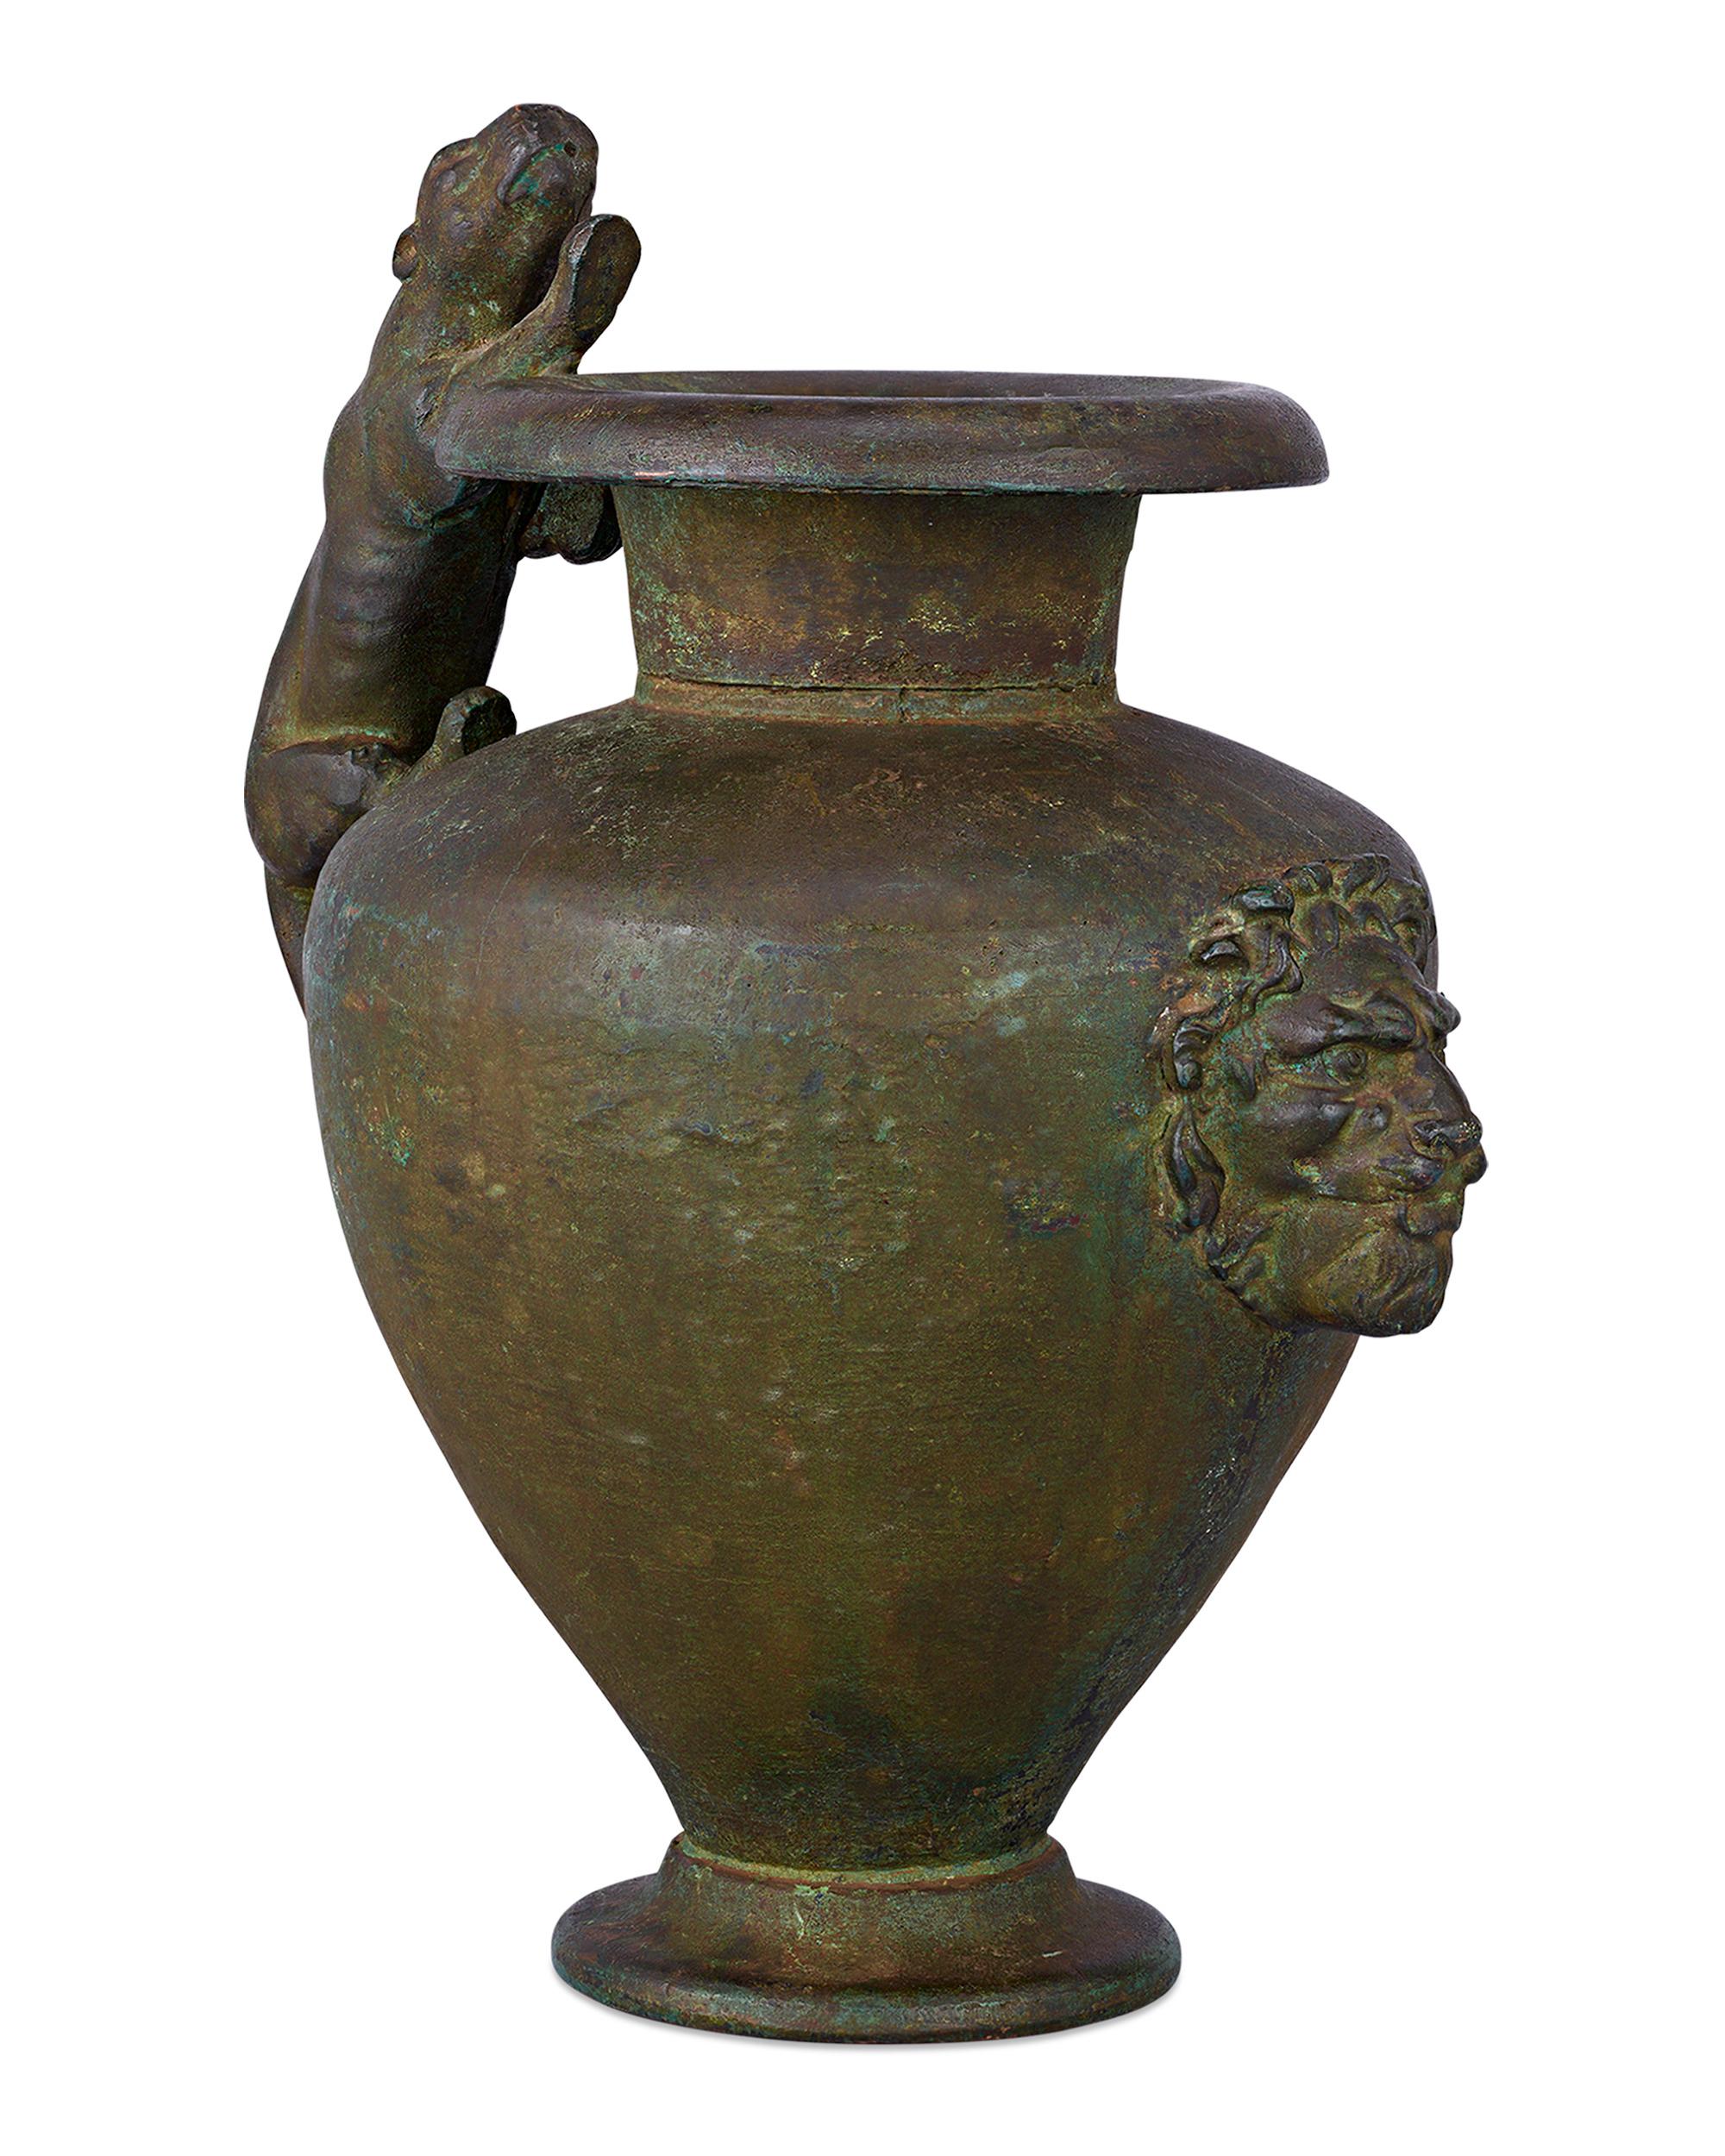 This extremely rare oenochoe, or wine jug, dates to the 2nd century CE. Crafted of bronze with an exquisite green patina, the sculpted handle is in the shape of a lioness, while the body is decorated with a lion's head and rests on a sculpted round